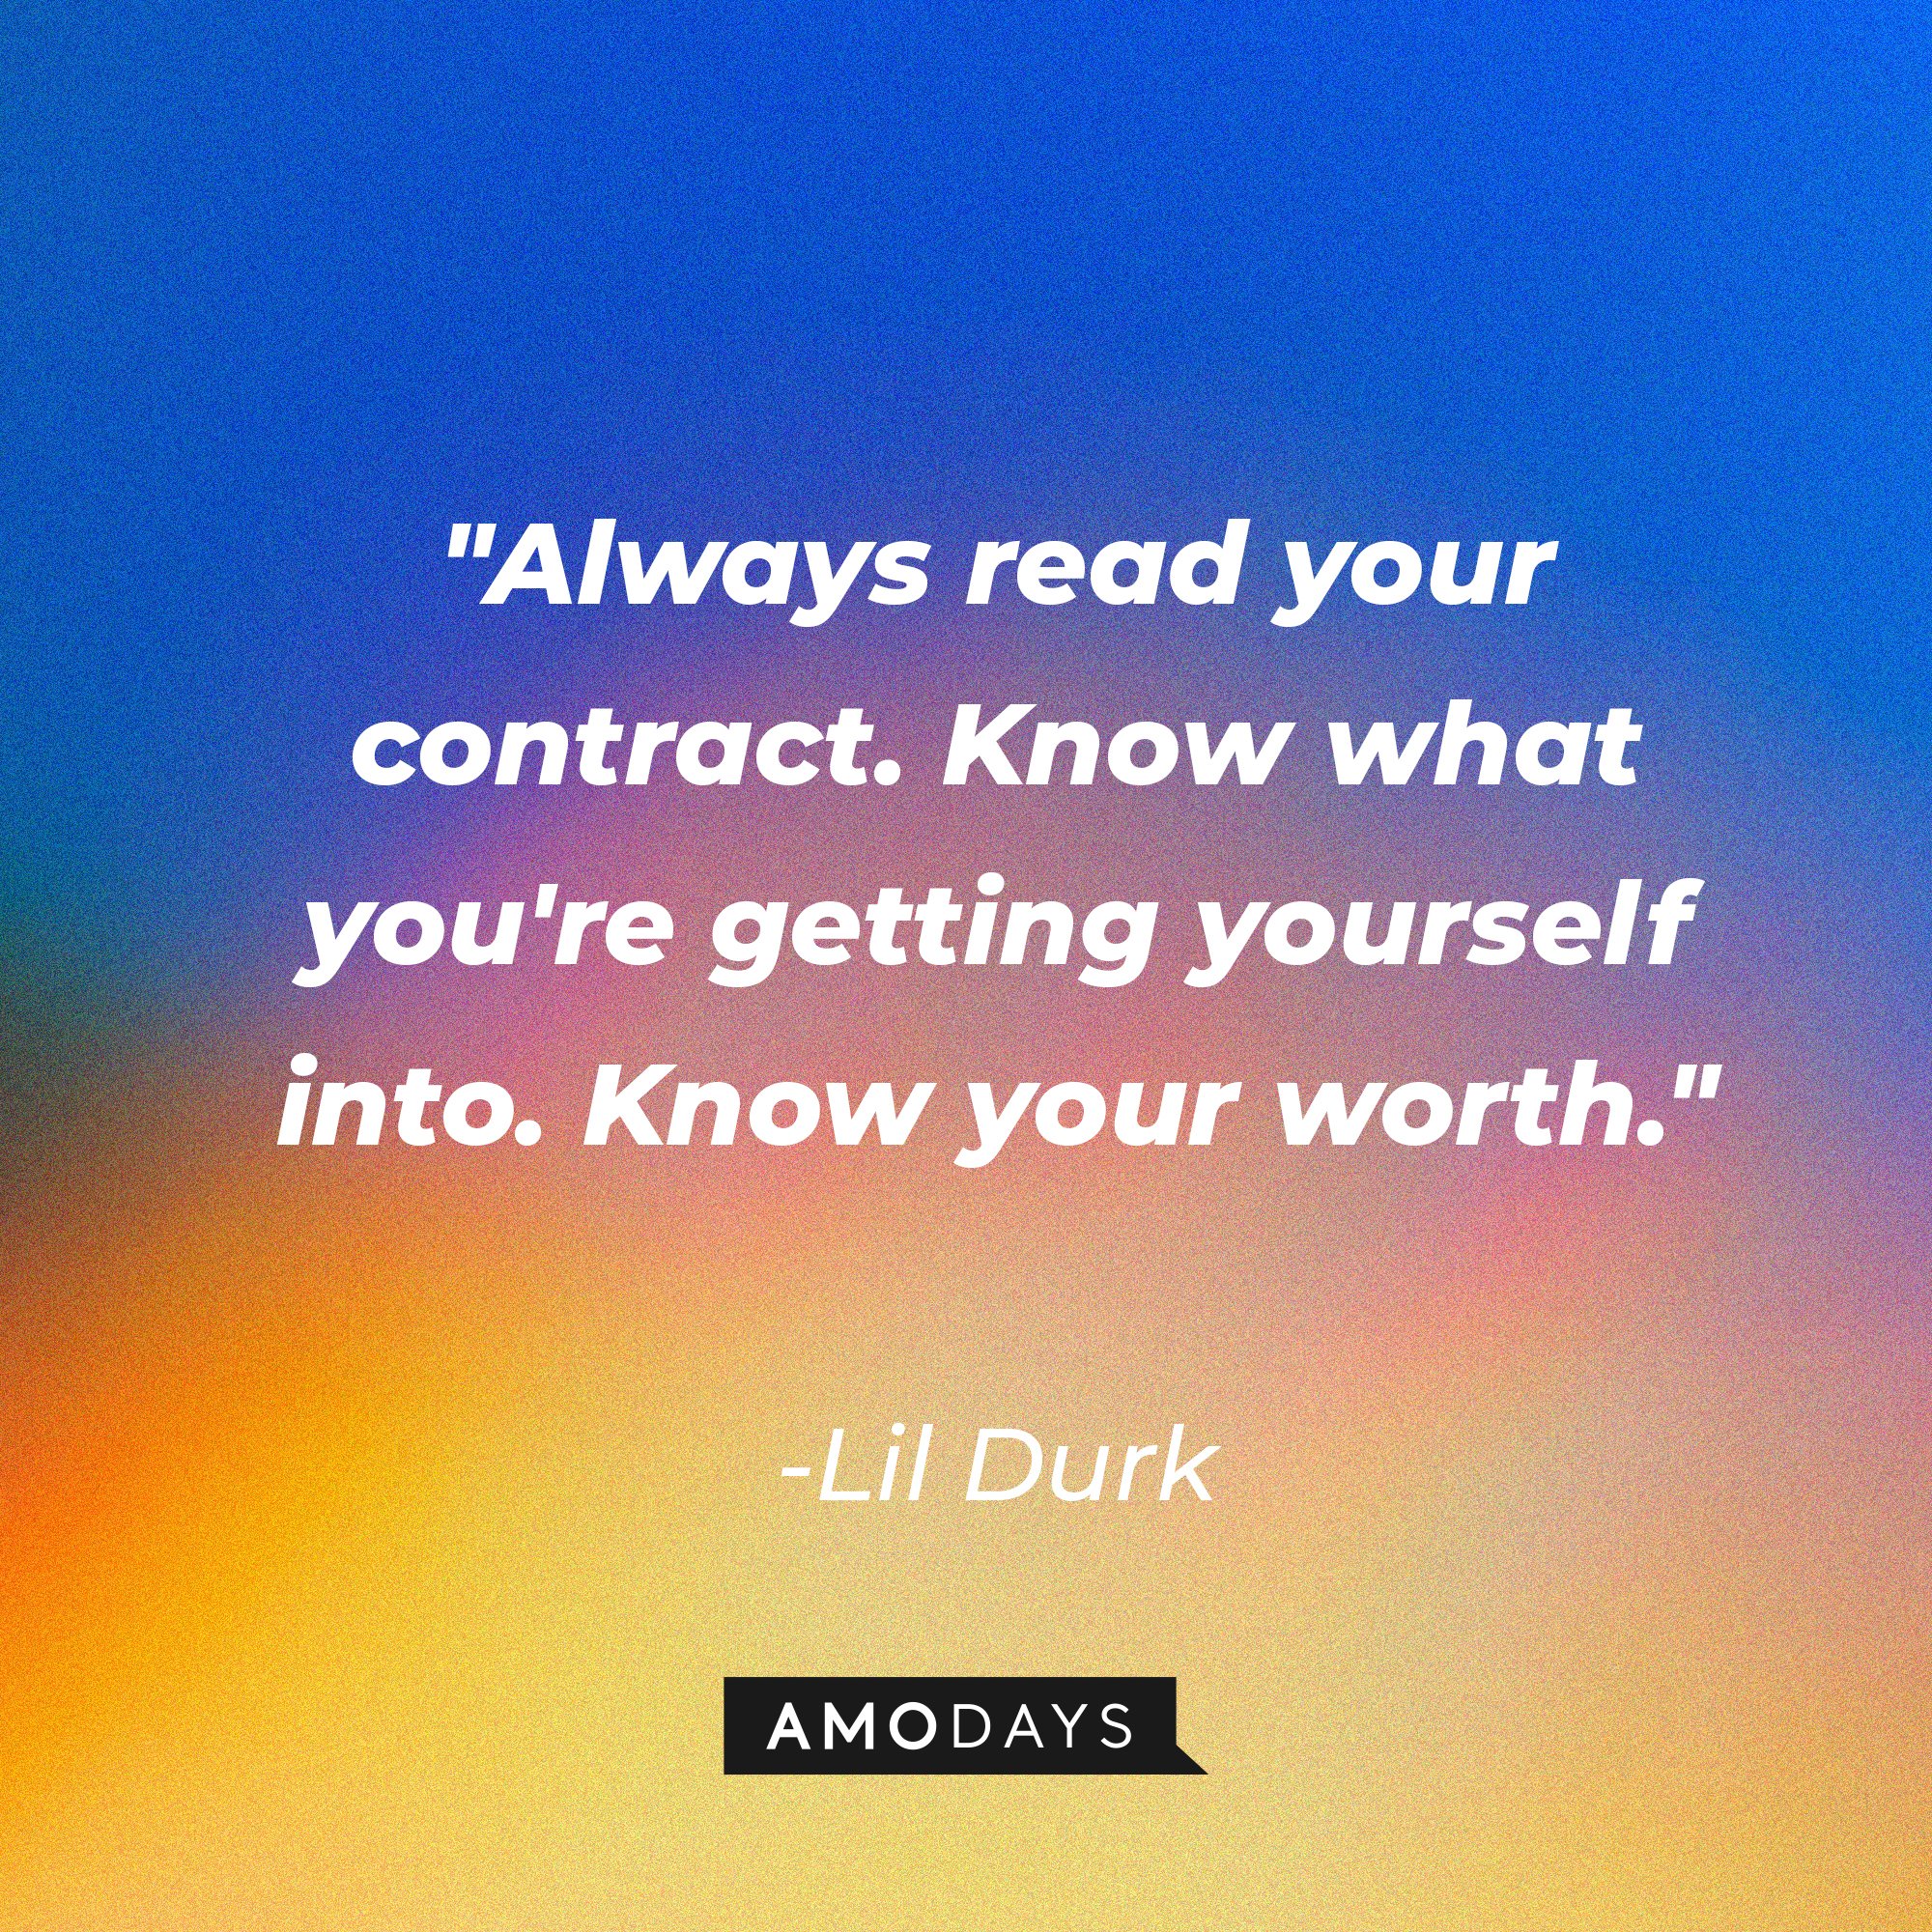 Lil Durk’s quote: "Always read your contract. Know what you're getting yourself into. Know your worth." | Image: AmoDays